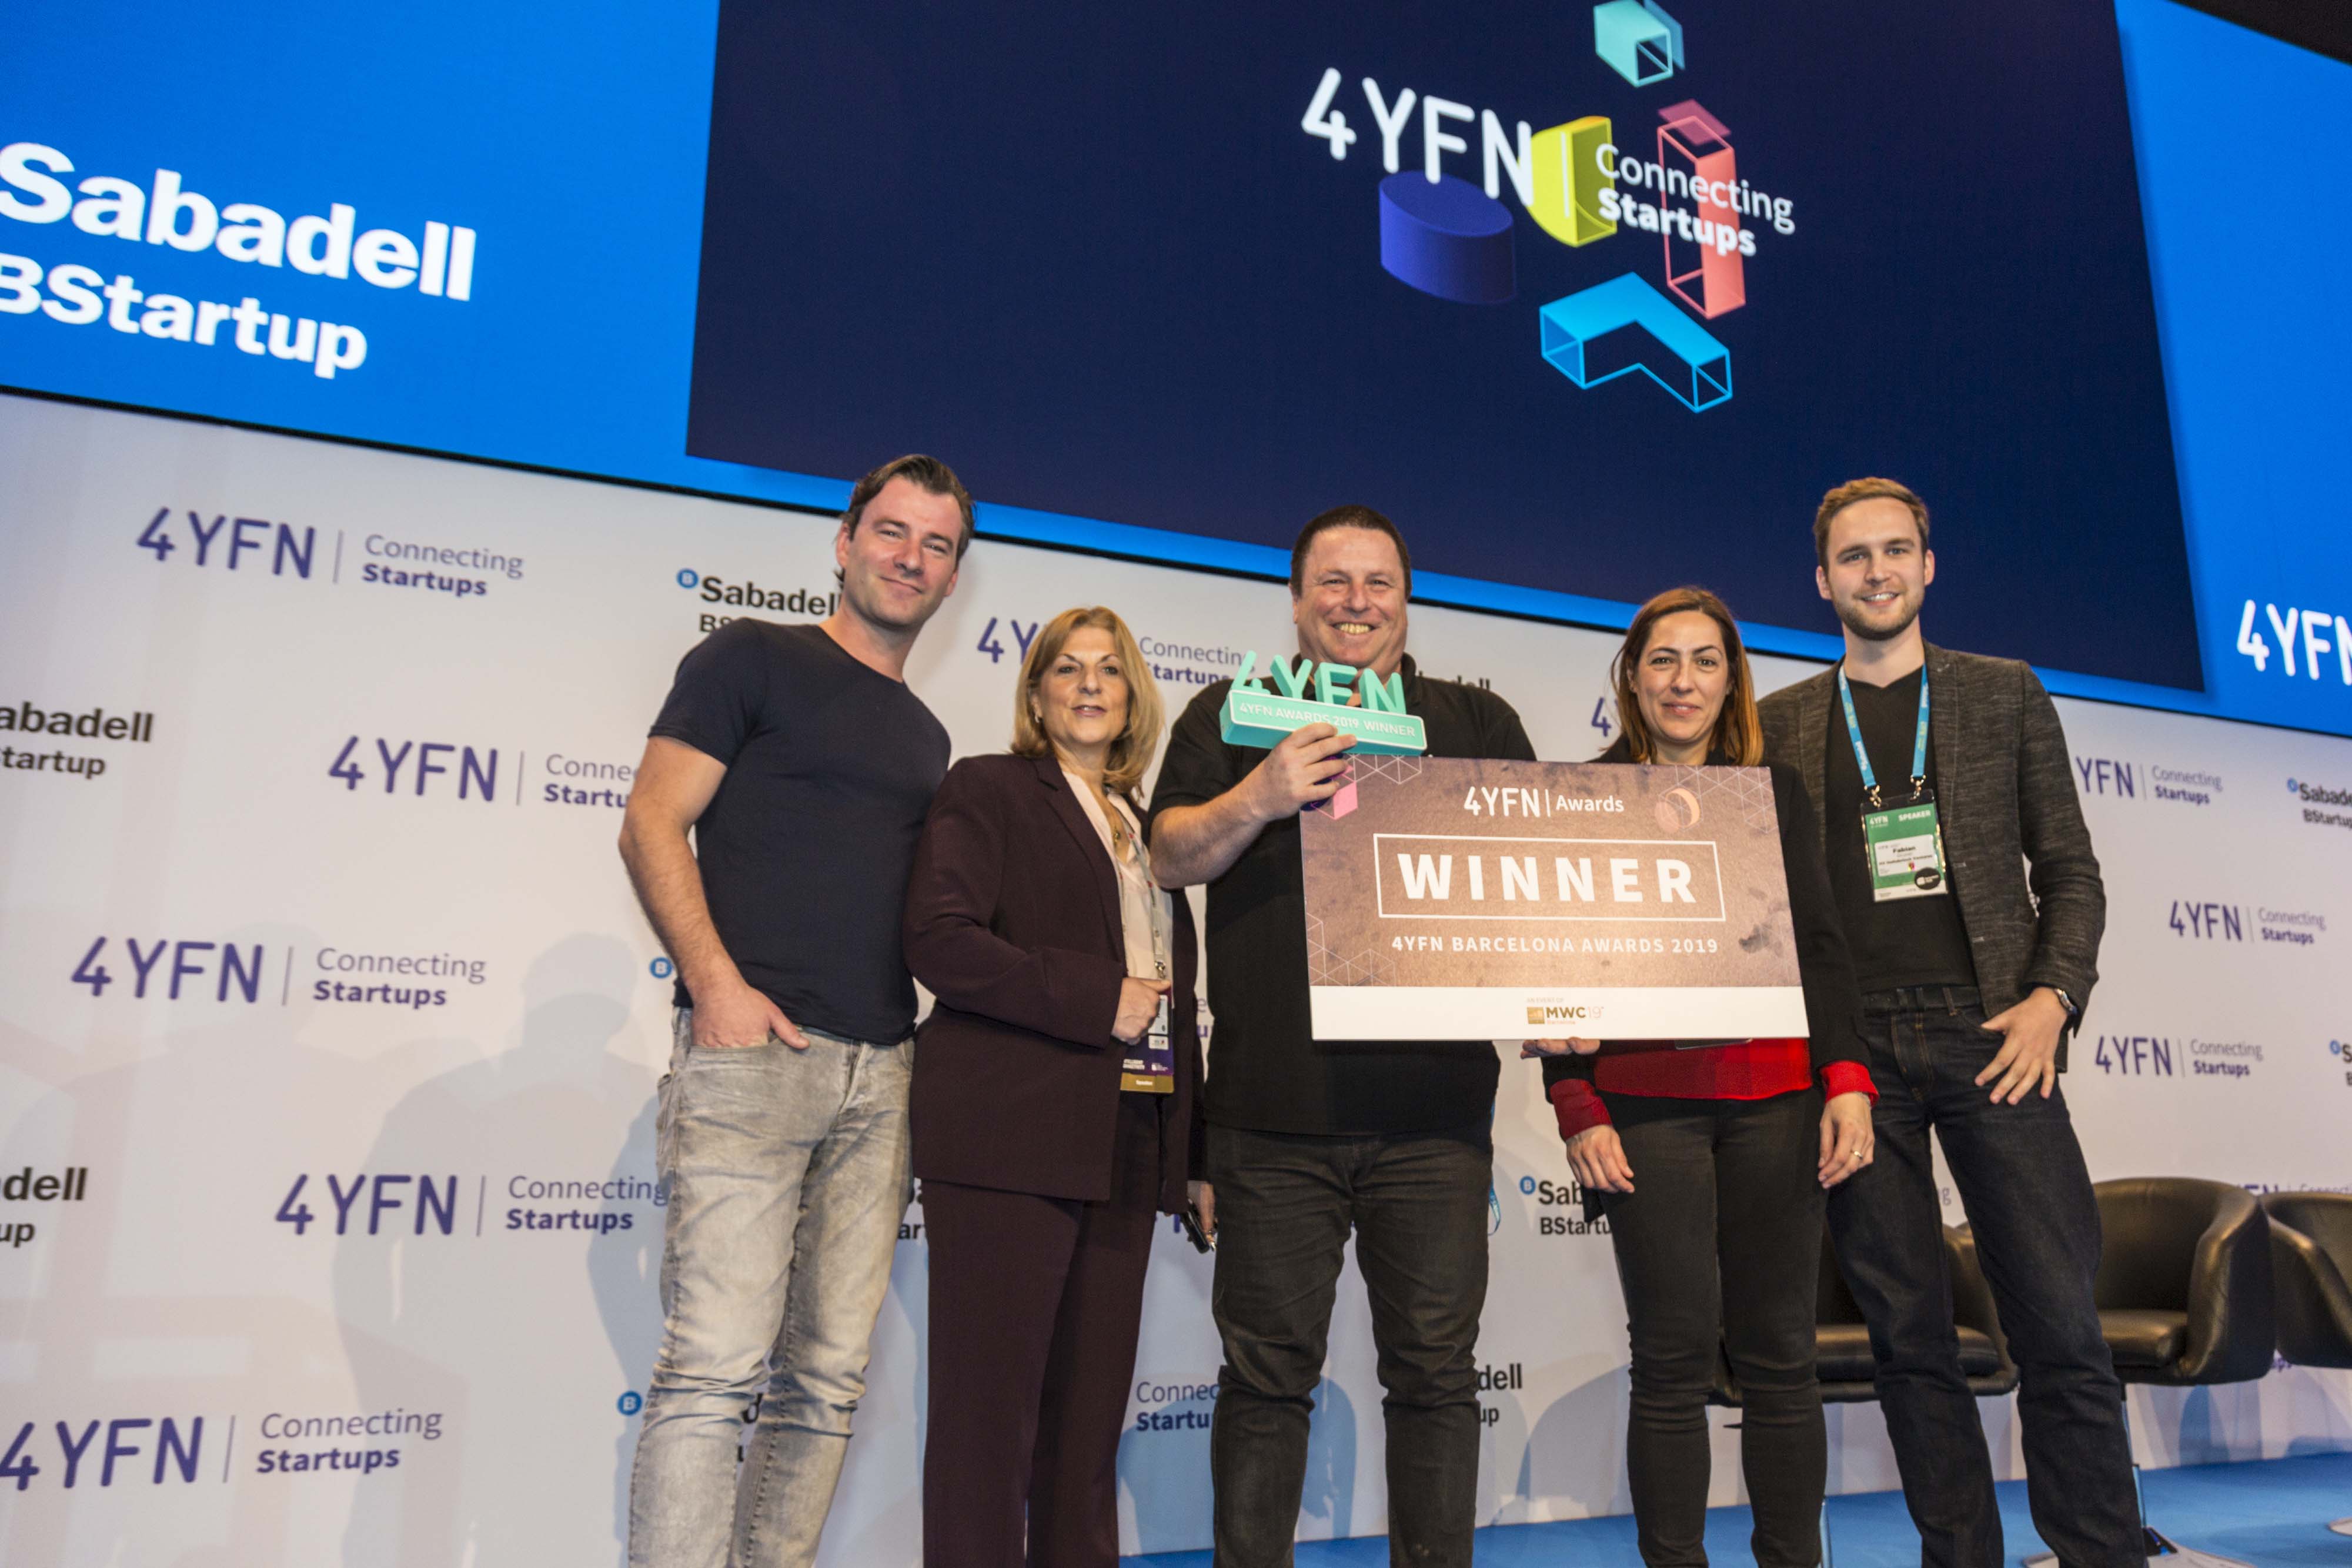 jammertal wellness questionnaire intrusive , IoT Device Security Startup NanoLock Wins GSMA’s 4YFN Competition